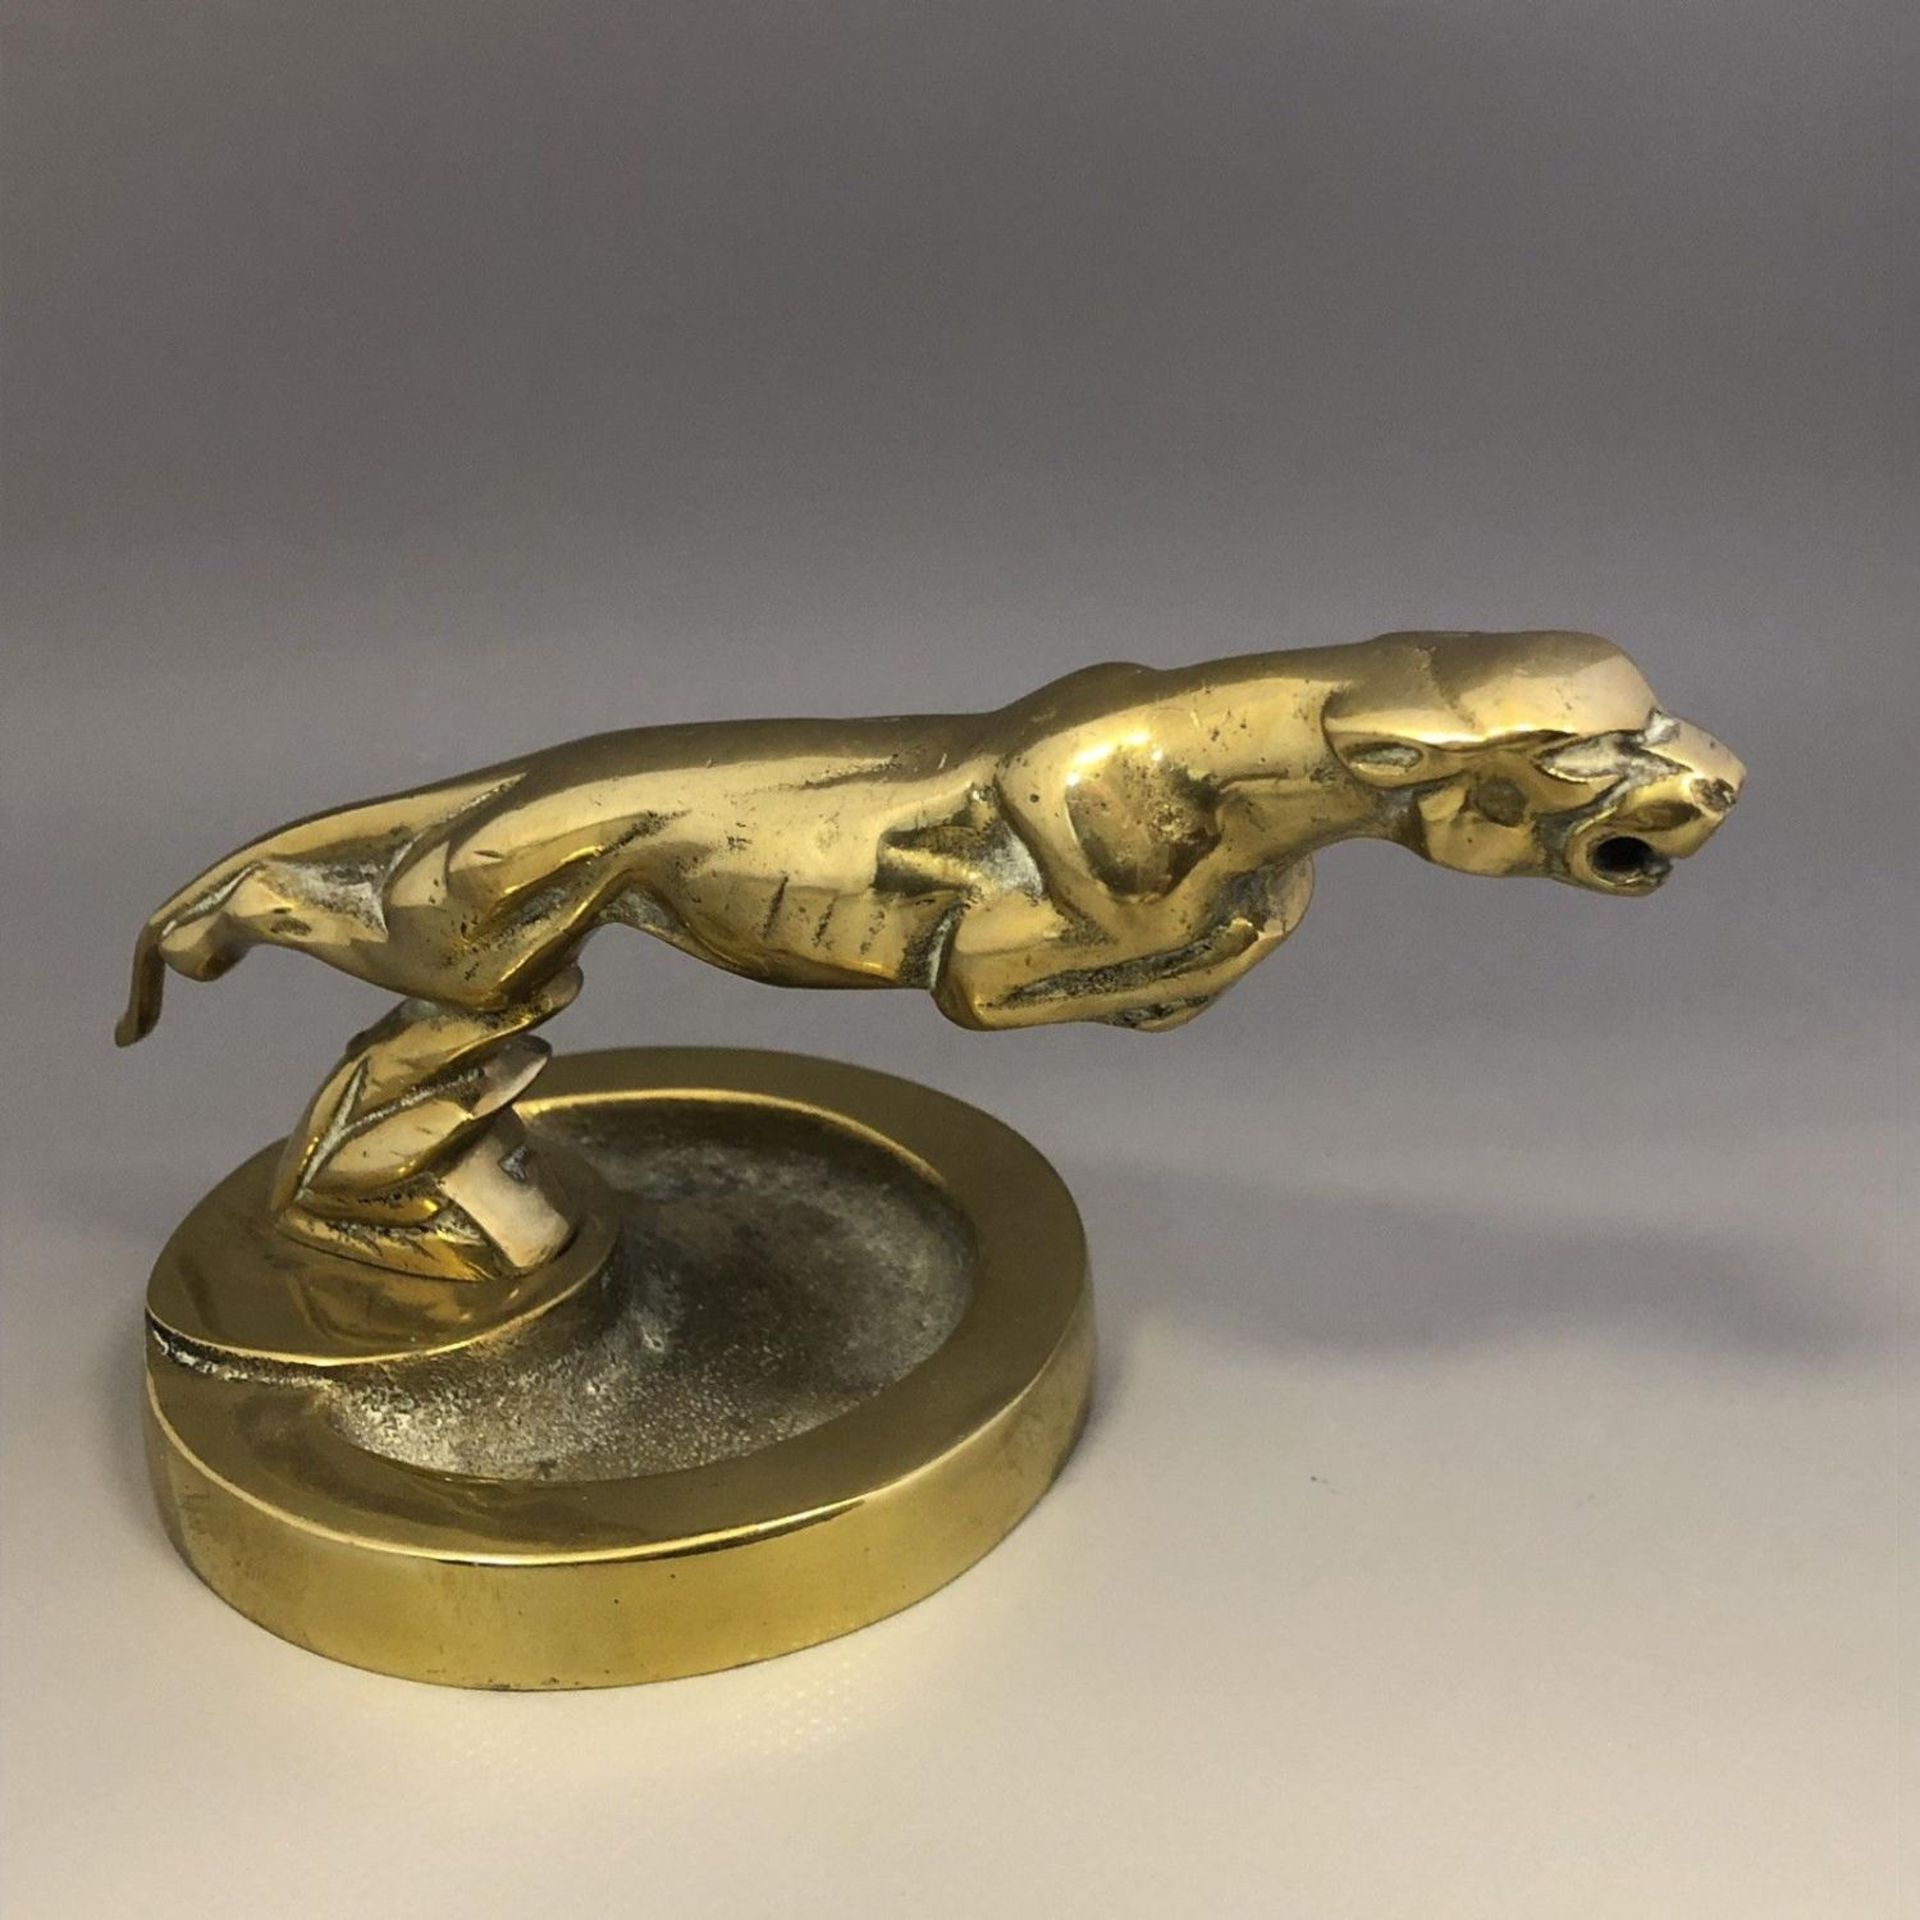 Vintage cast brass ashtray with leaping jaguar mount car mascot - Image 2 of 6